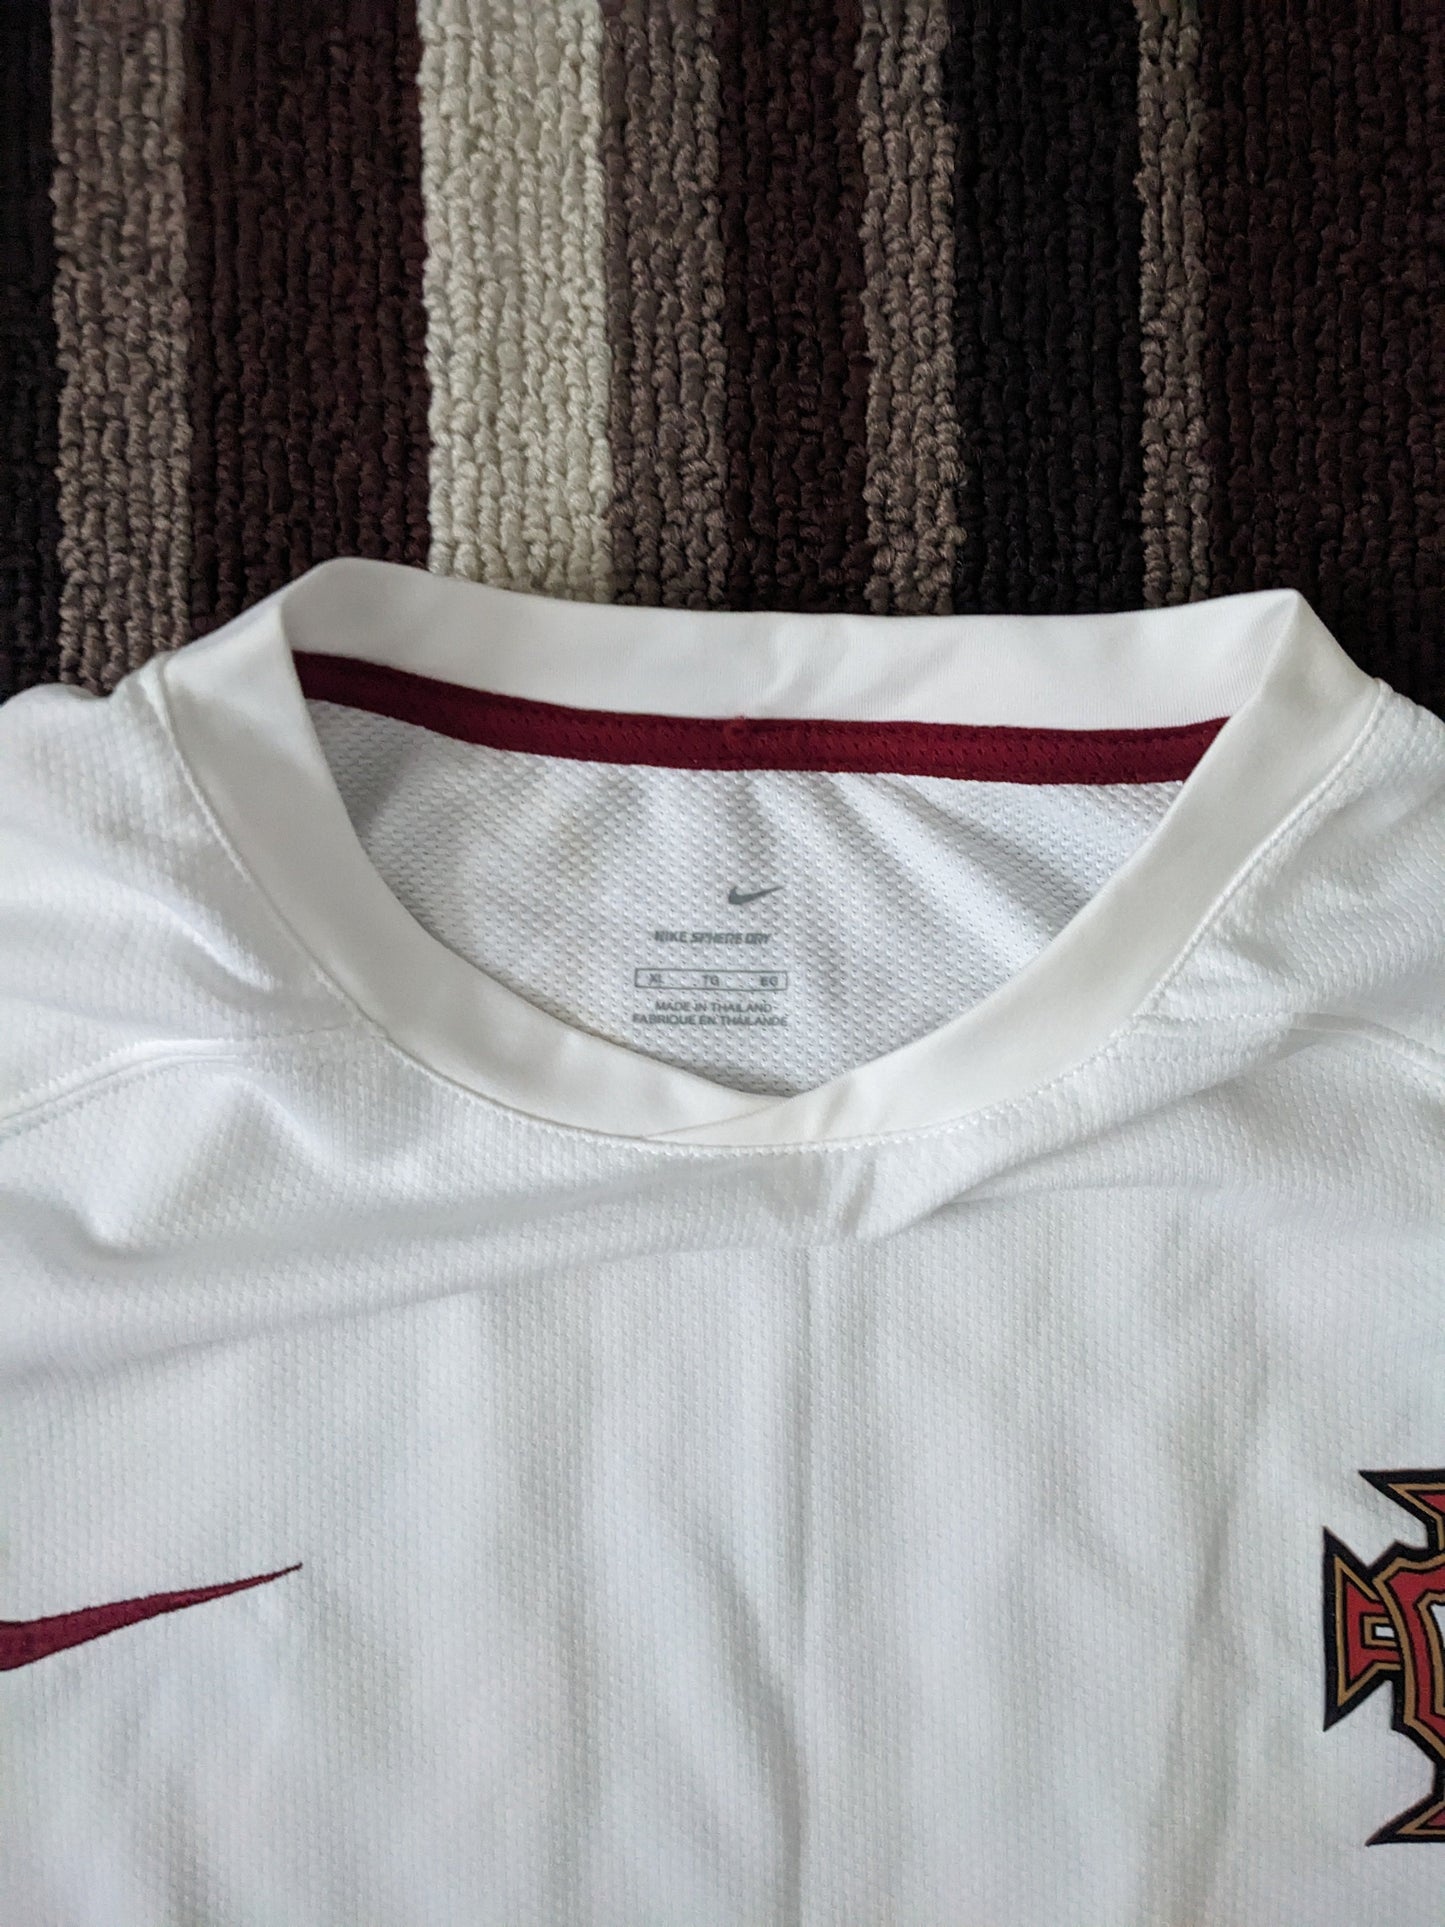 Portugal 2006-07 Training Sleeveless (XL) * Brand new with tags